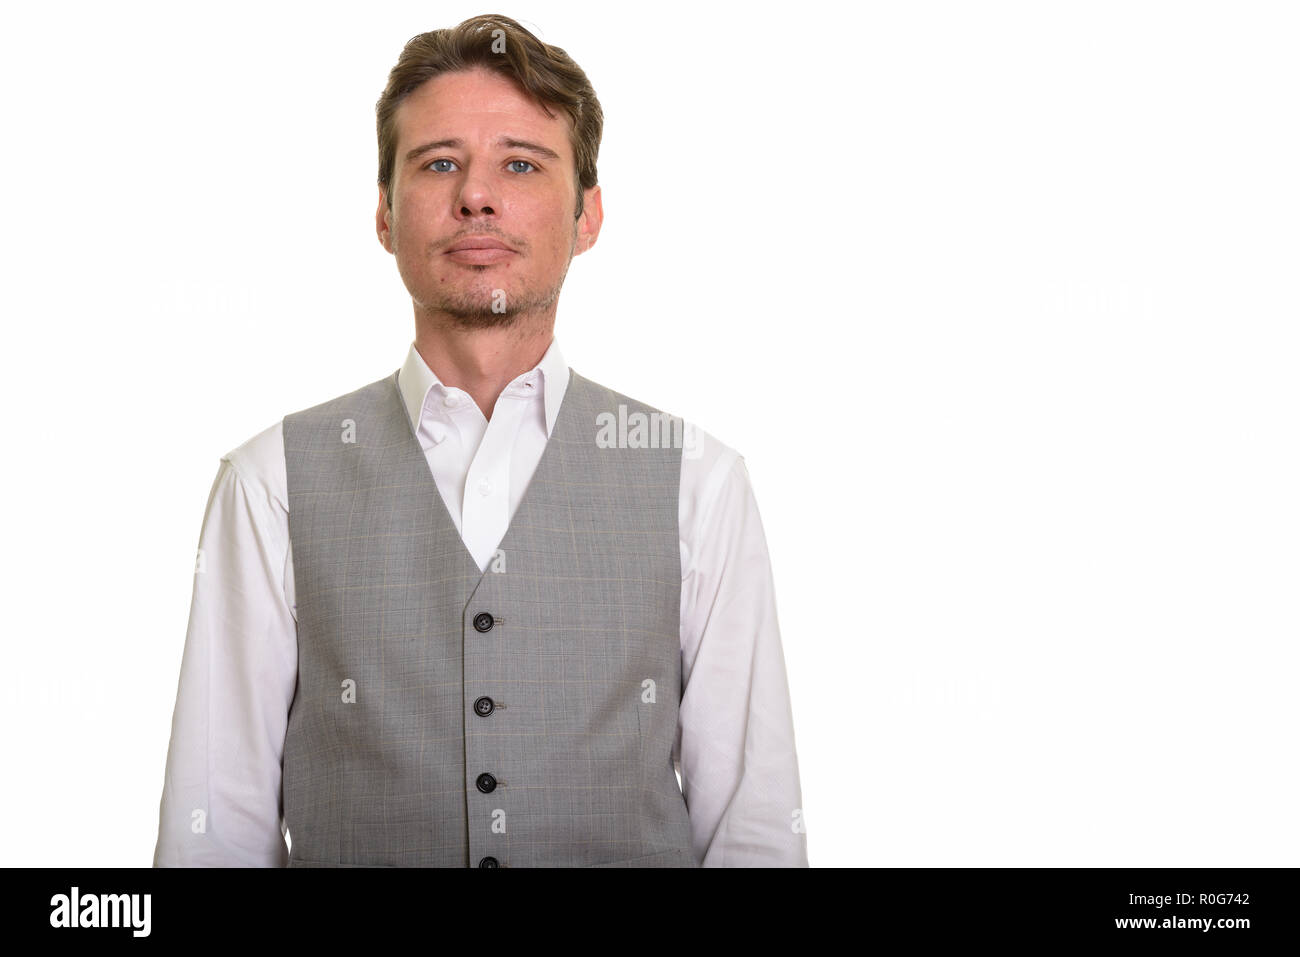 Handsome formal Caucasian man wearing vest and looking at camera Stock Photo